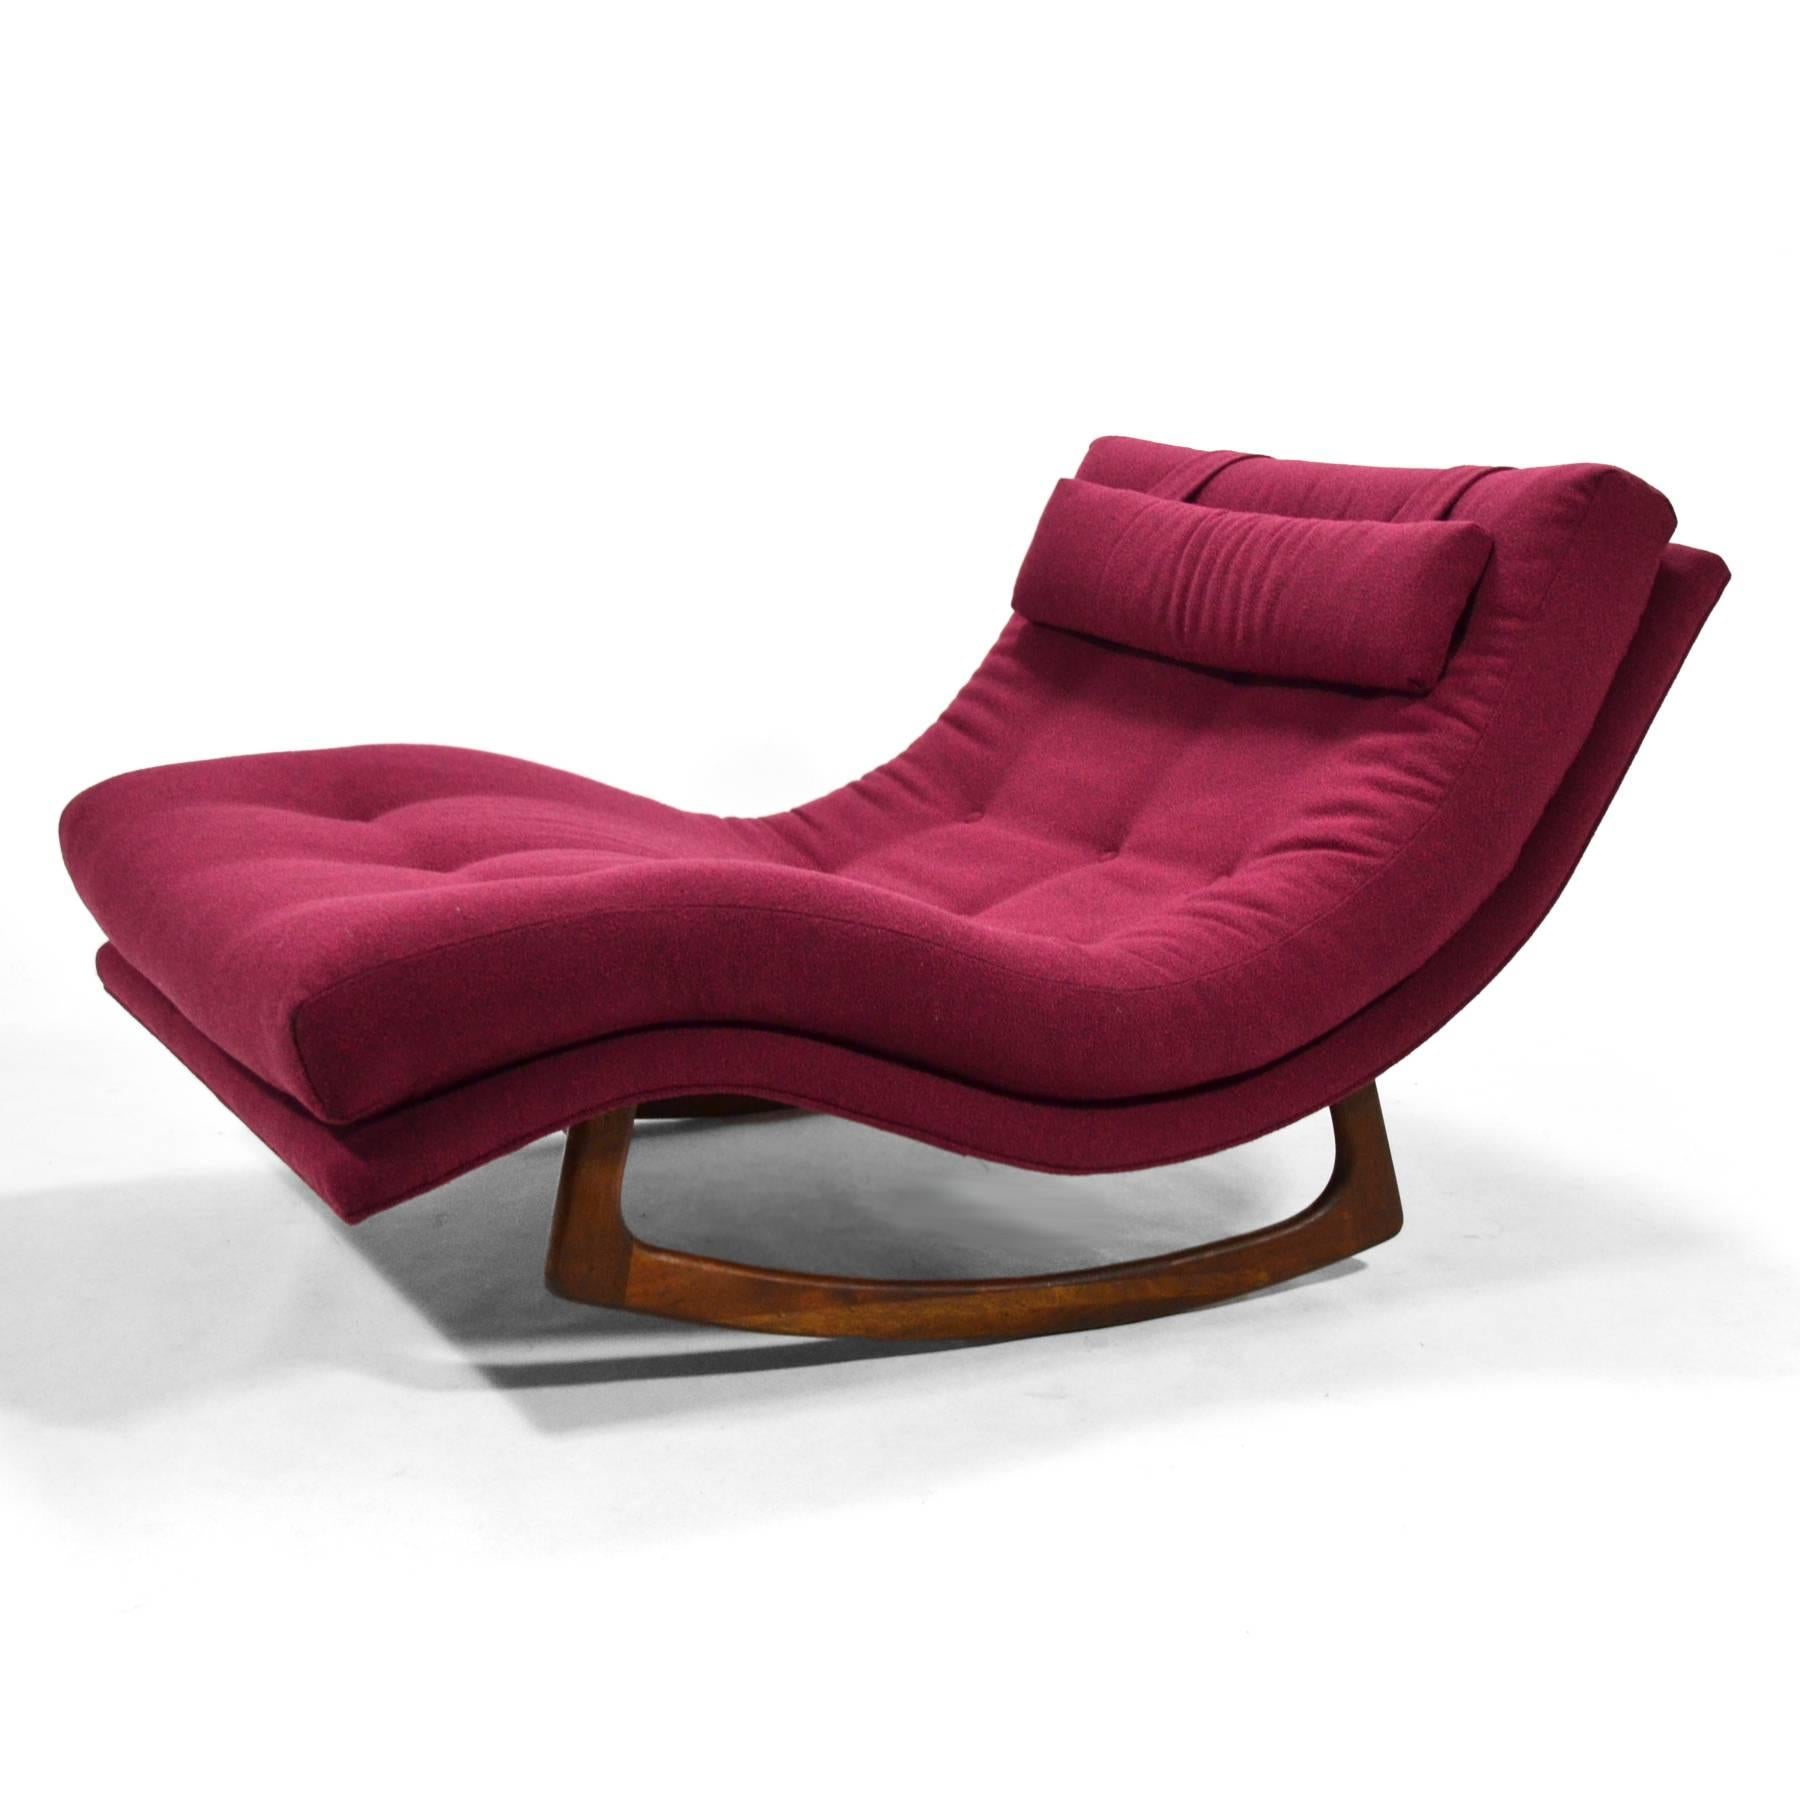 Mid-20th Century Adrian Pearsall Rocking Chaise by Craft Assoc.